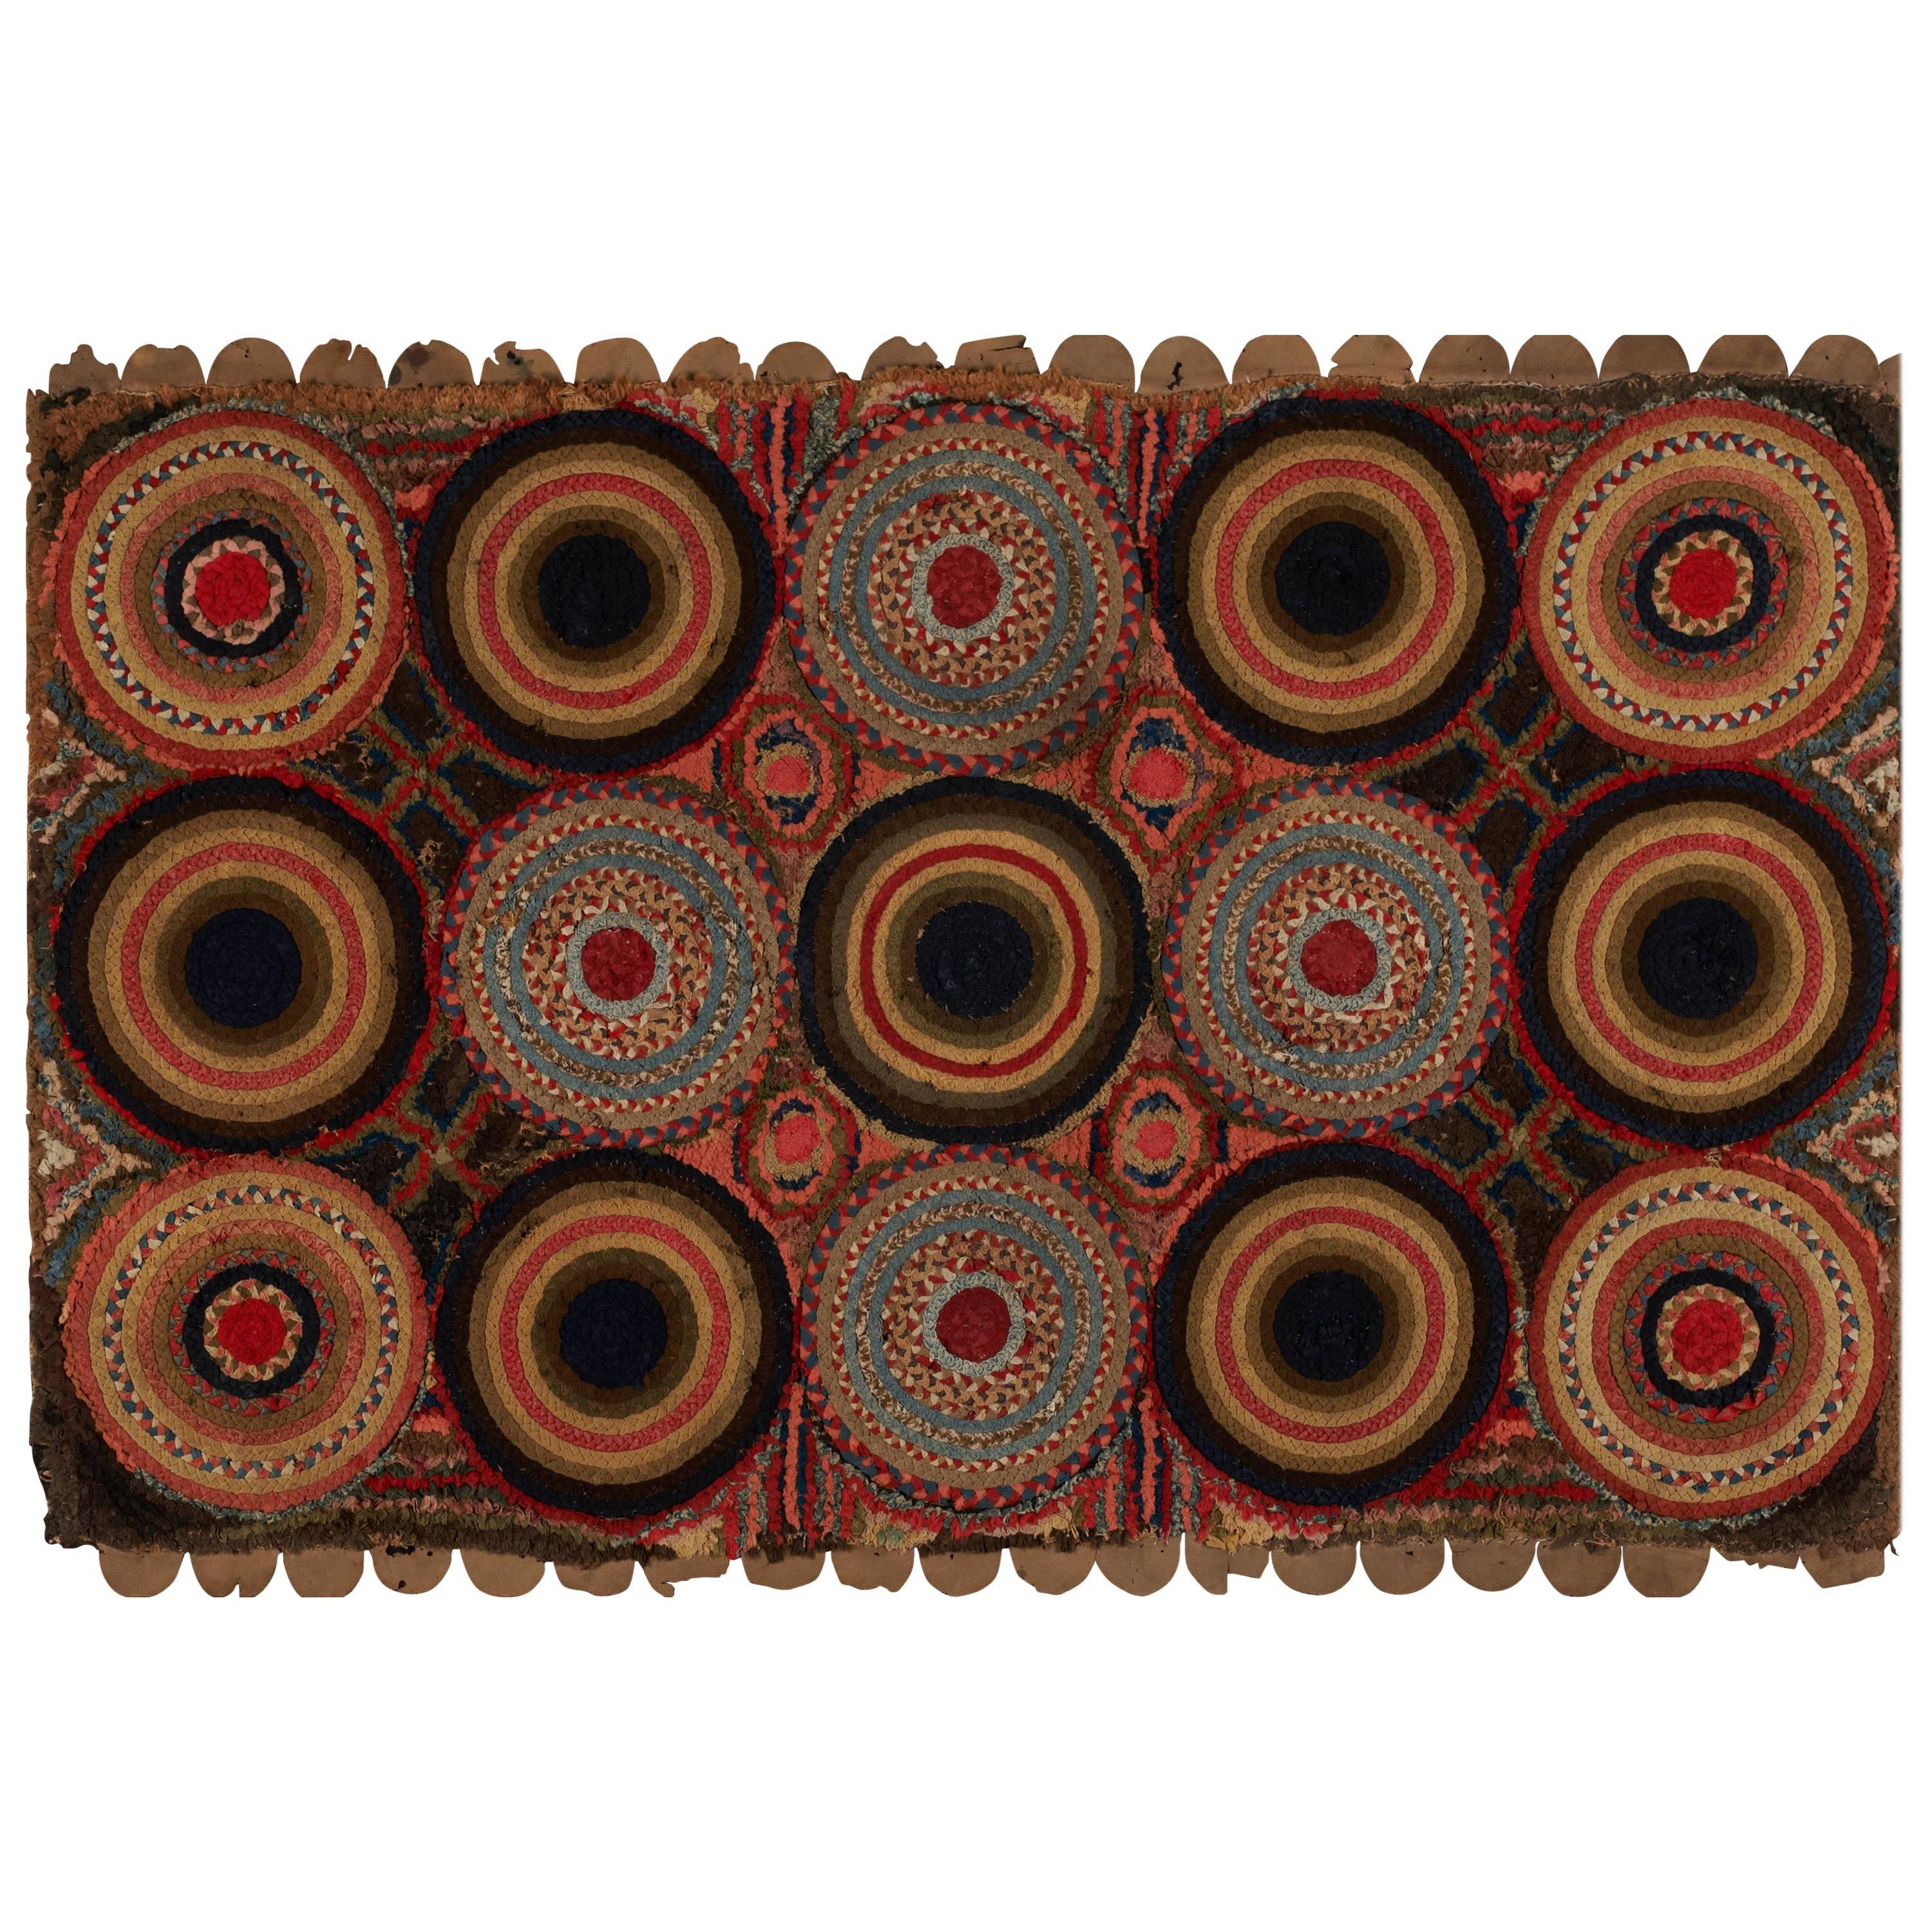 New England Braided Circles Hooked Rug For Sale